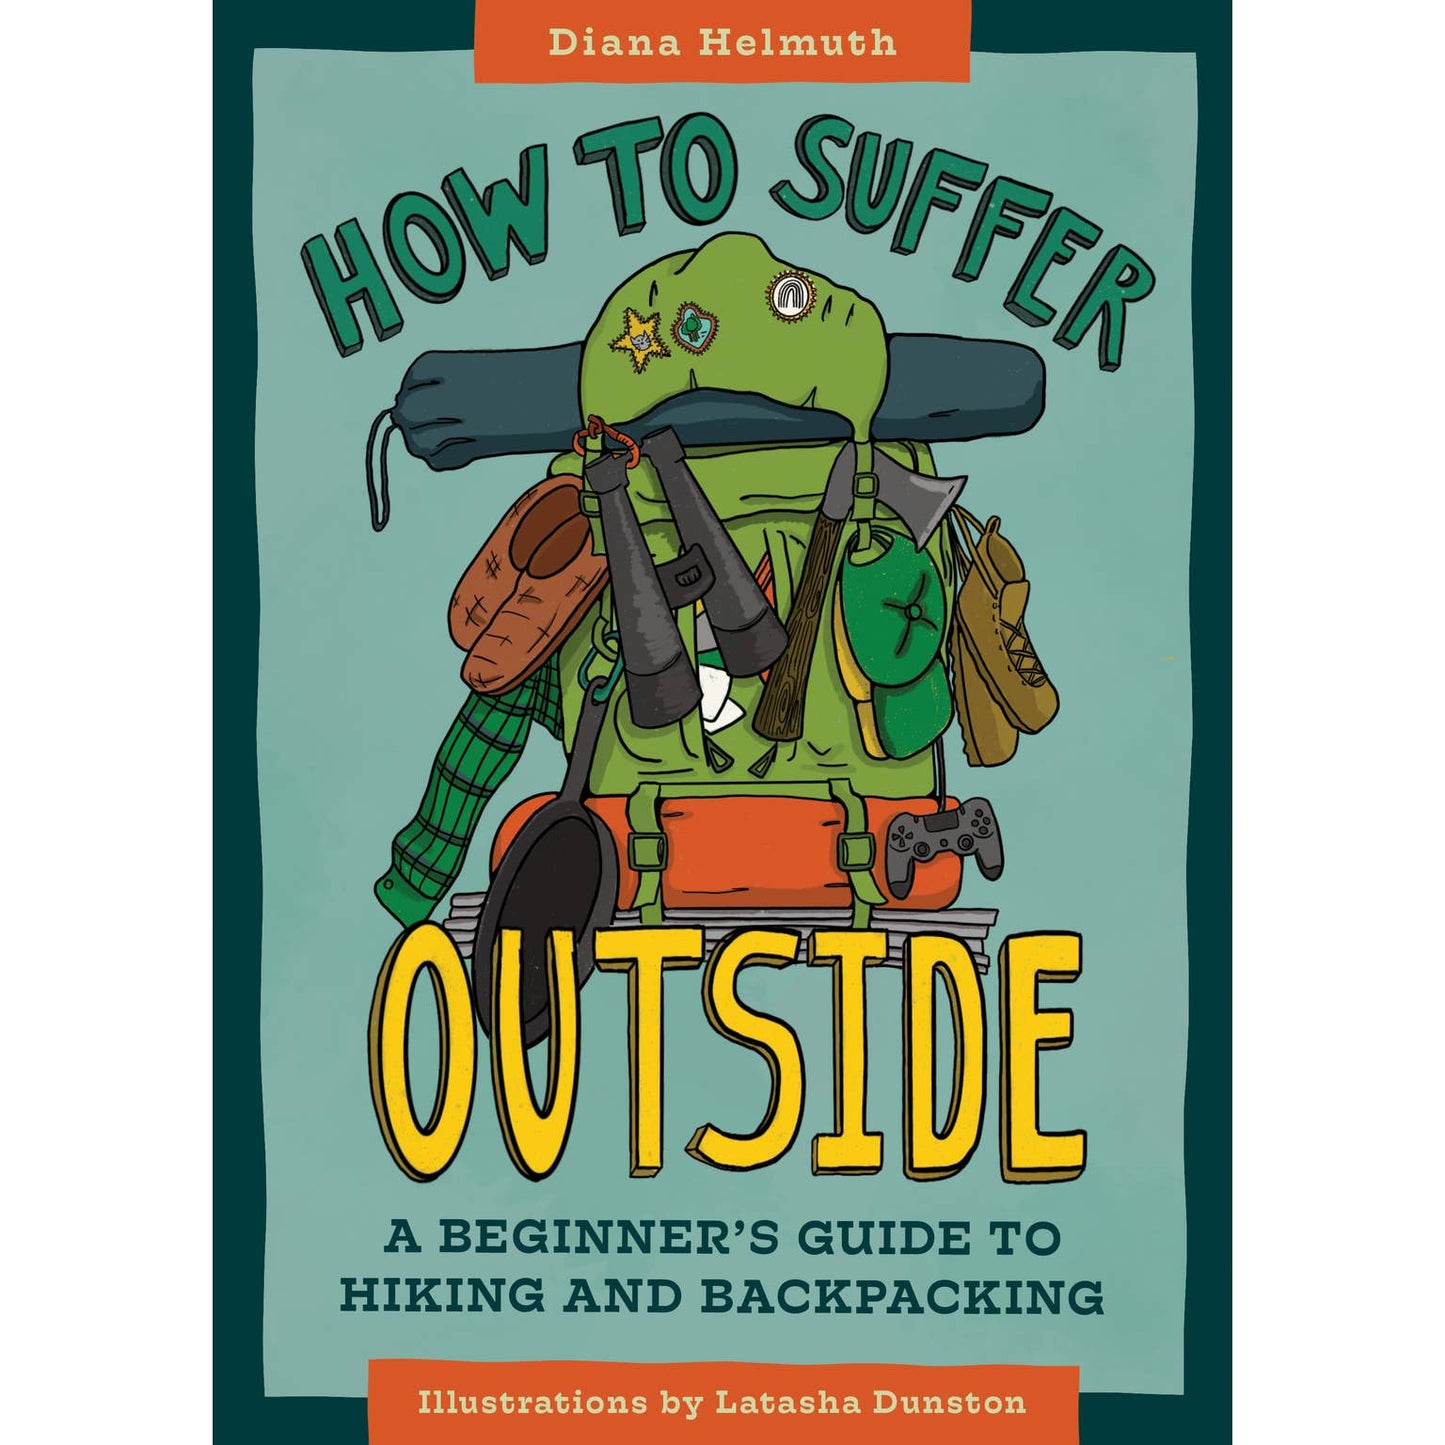 How to suffer outside- a beginners guide to hiking and backpacking